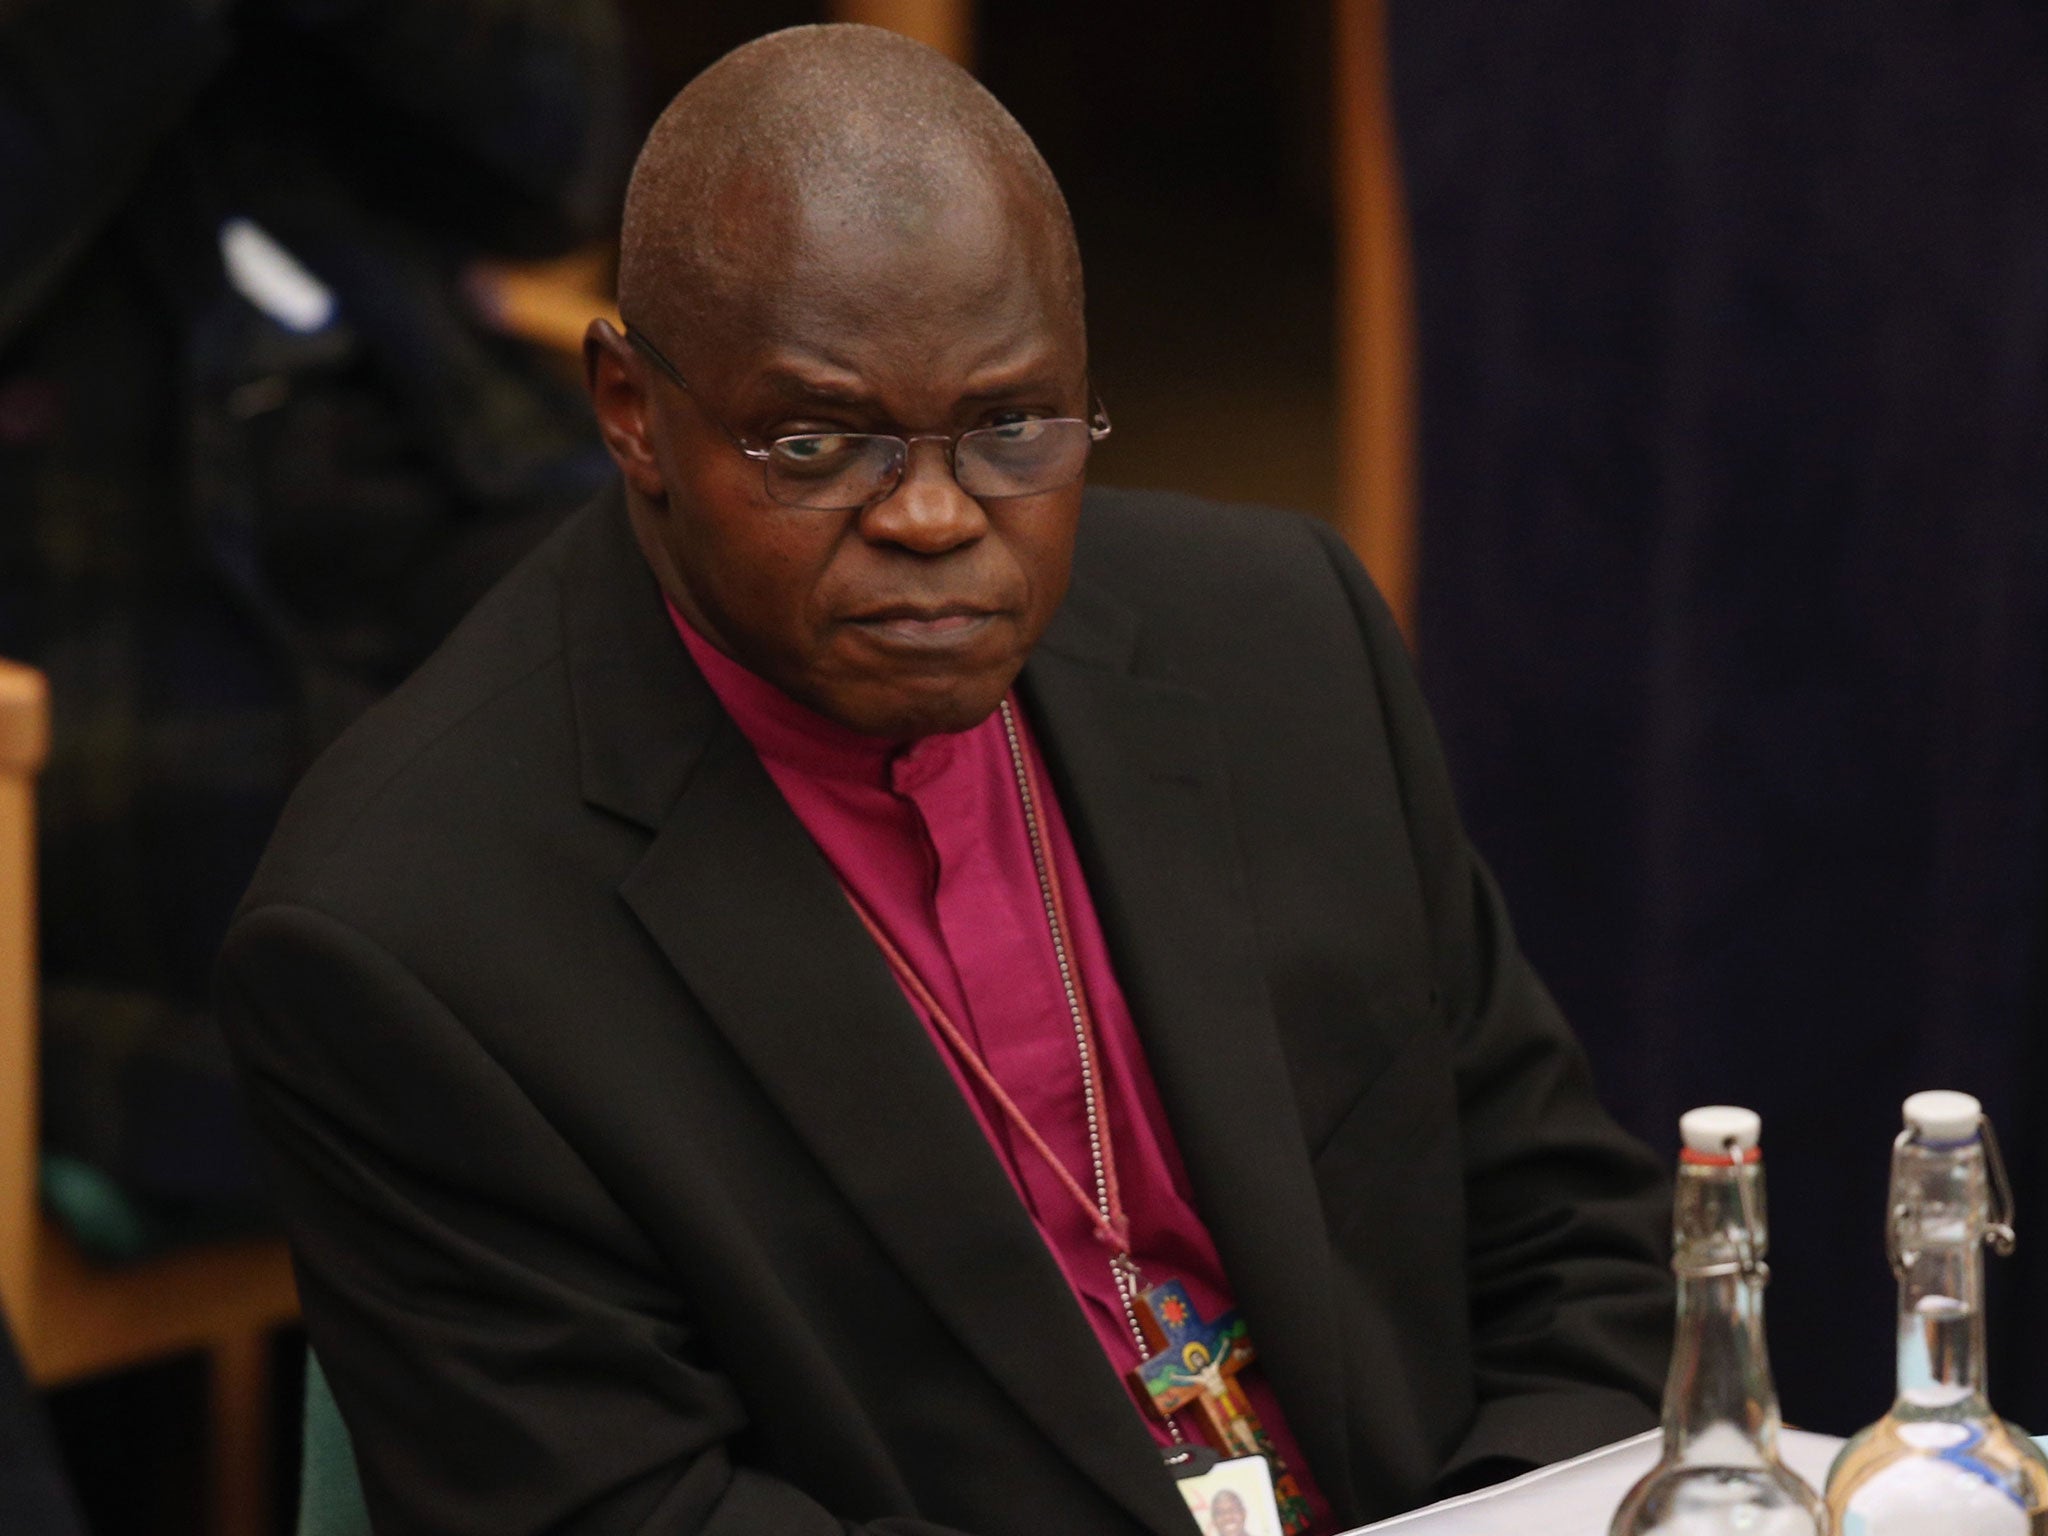 Dr John Sentamu, the Archbishop of York, sits after addressing the General Synod on November 19, 2013 in London, England.